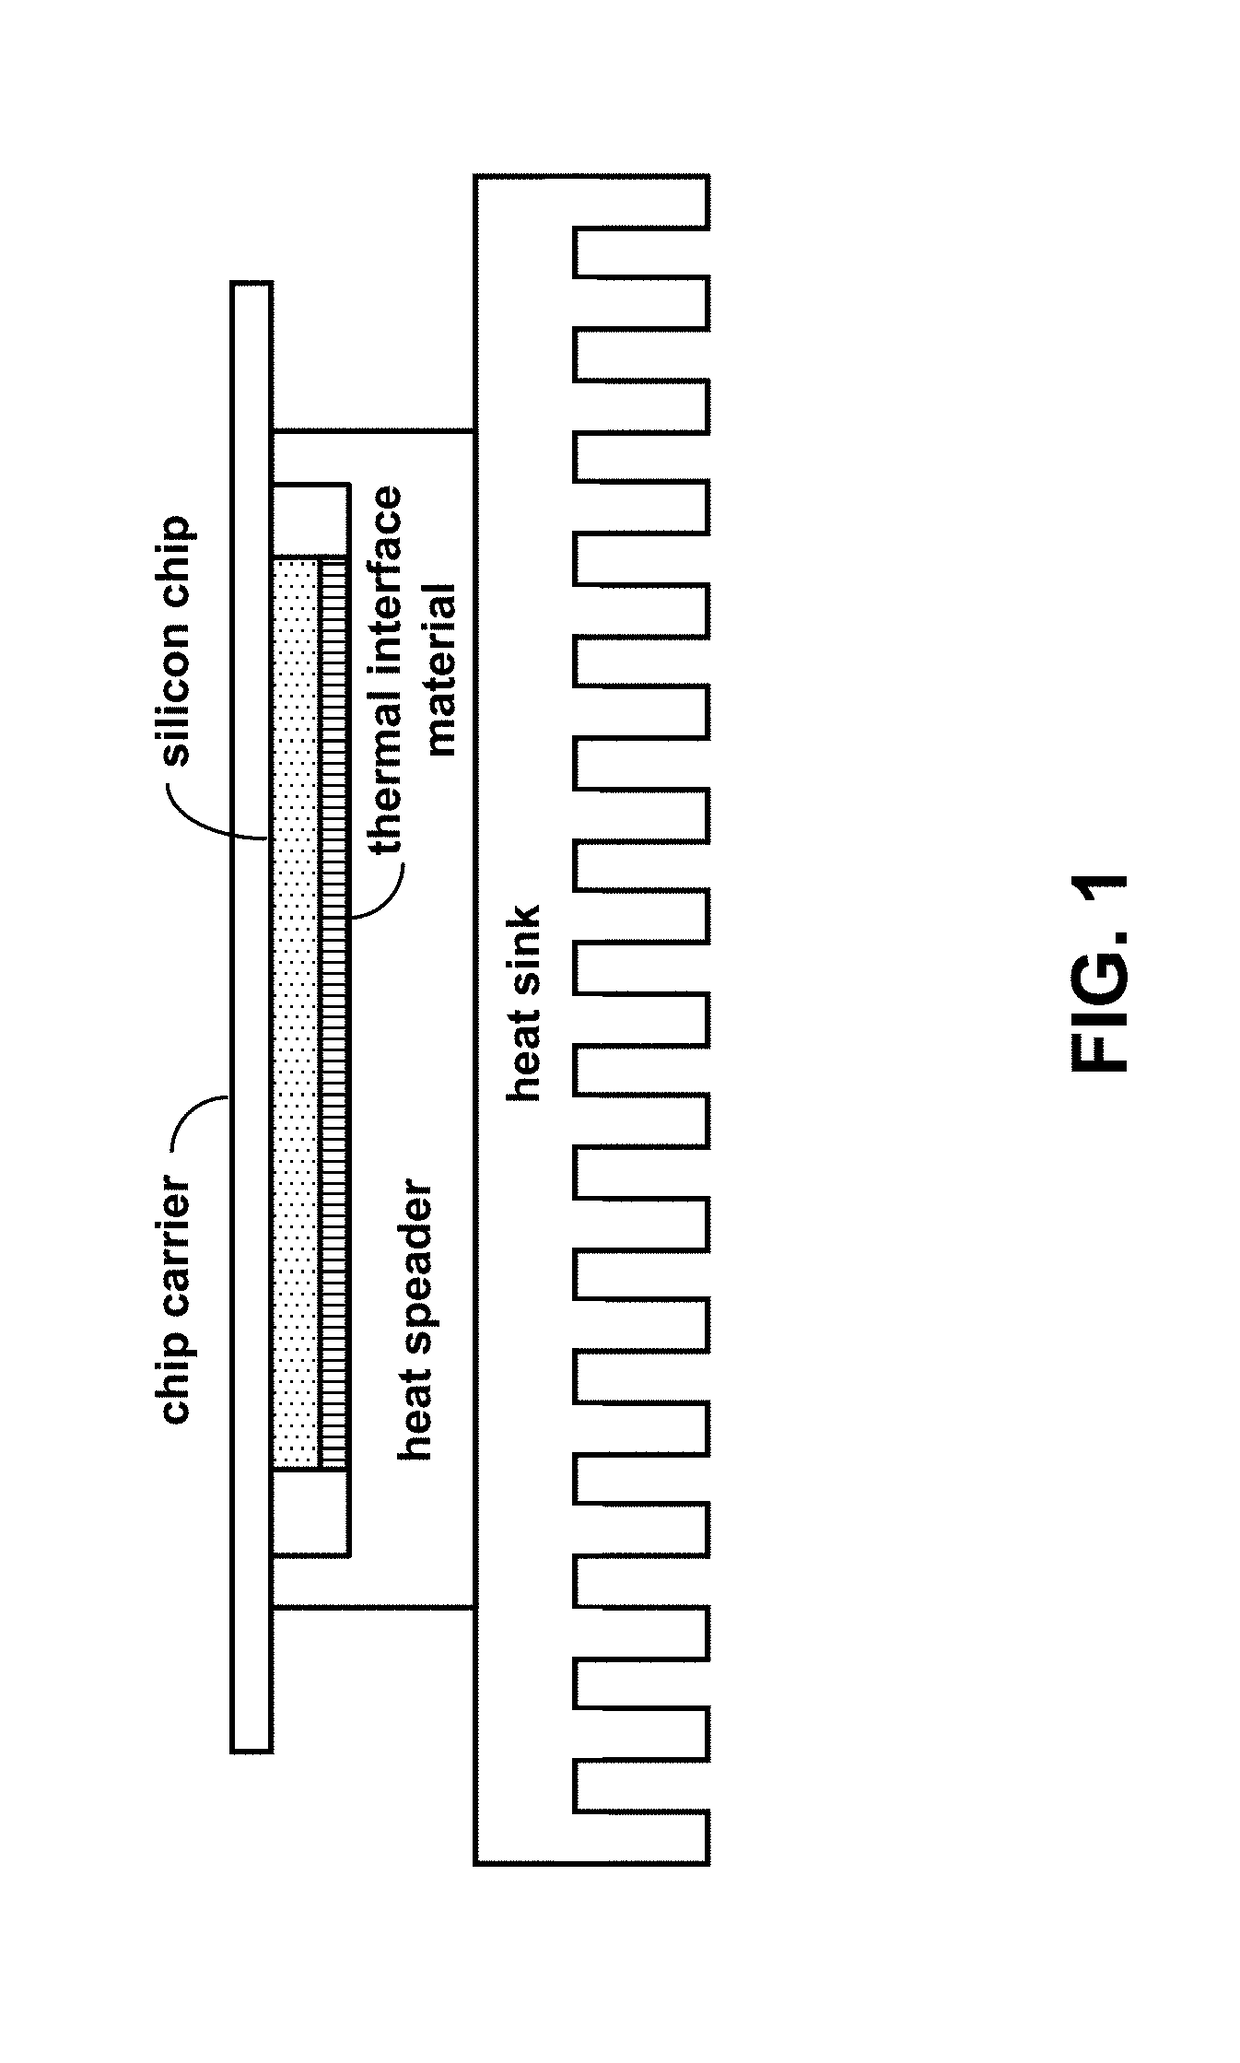 Method for controlled growth of carbon nanotubes in a vertically aligned array